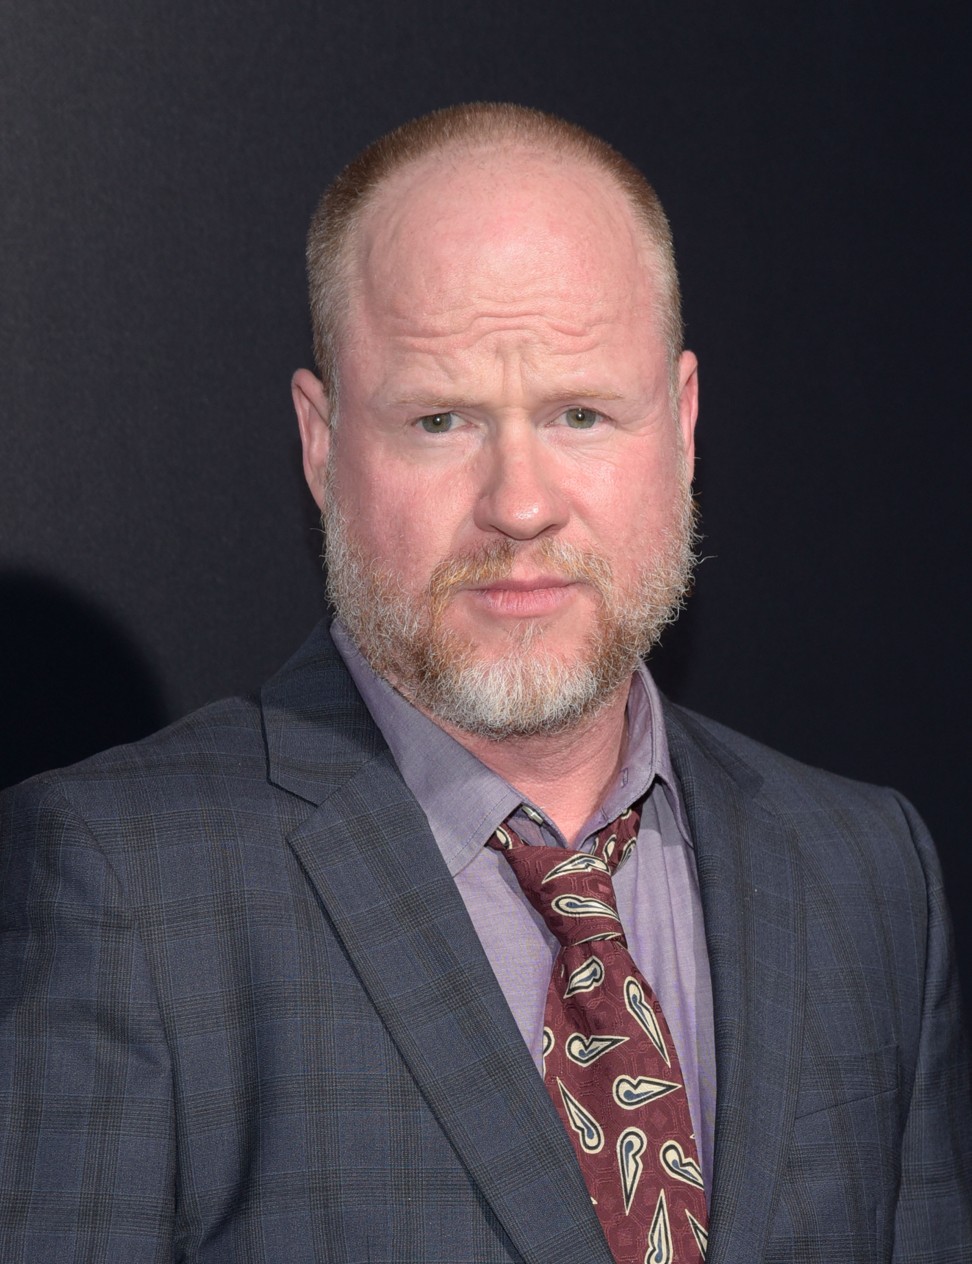 Joss Whedon, creator of TV series including Buffy the Vampire Slayer, Angel, and Agents of S.H.I.E.L.D., will return to television with the HBO show The Nevers. Photo: AFP